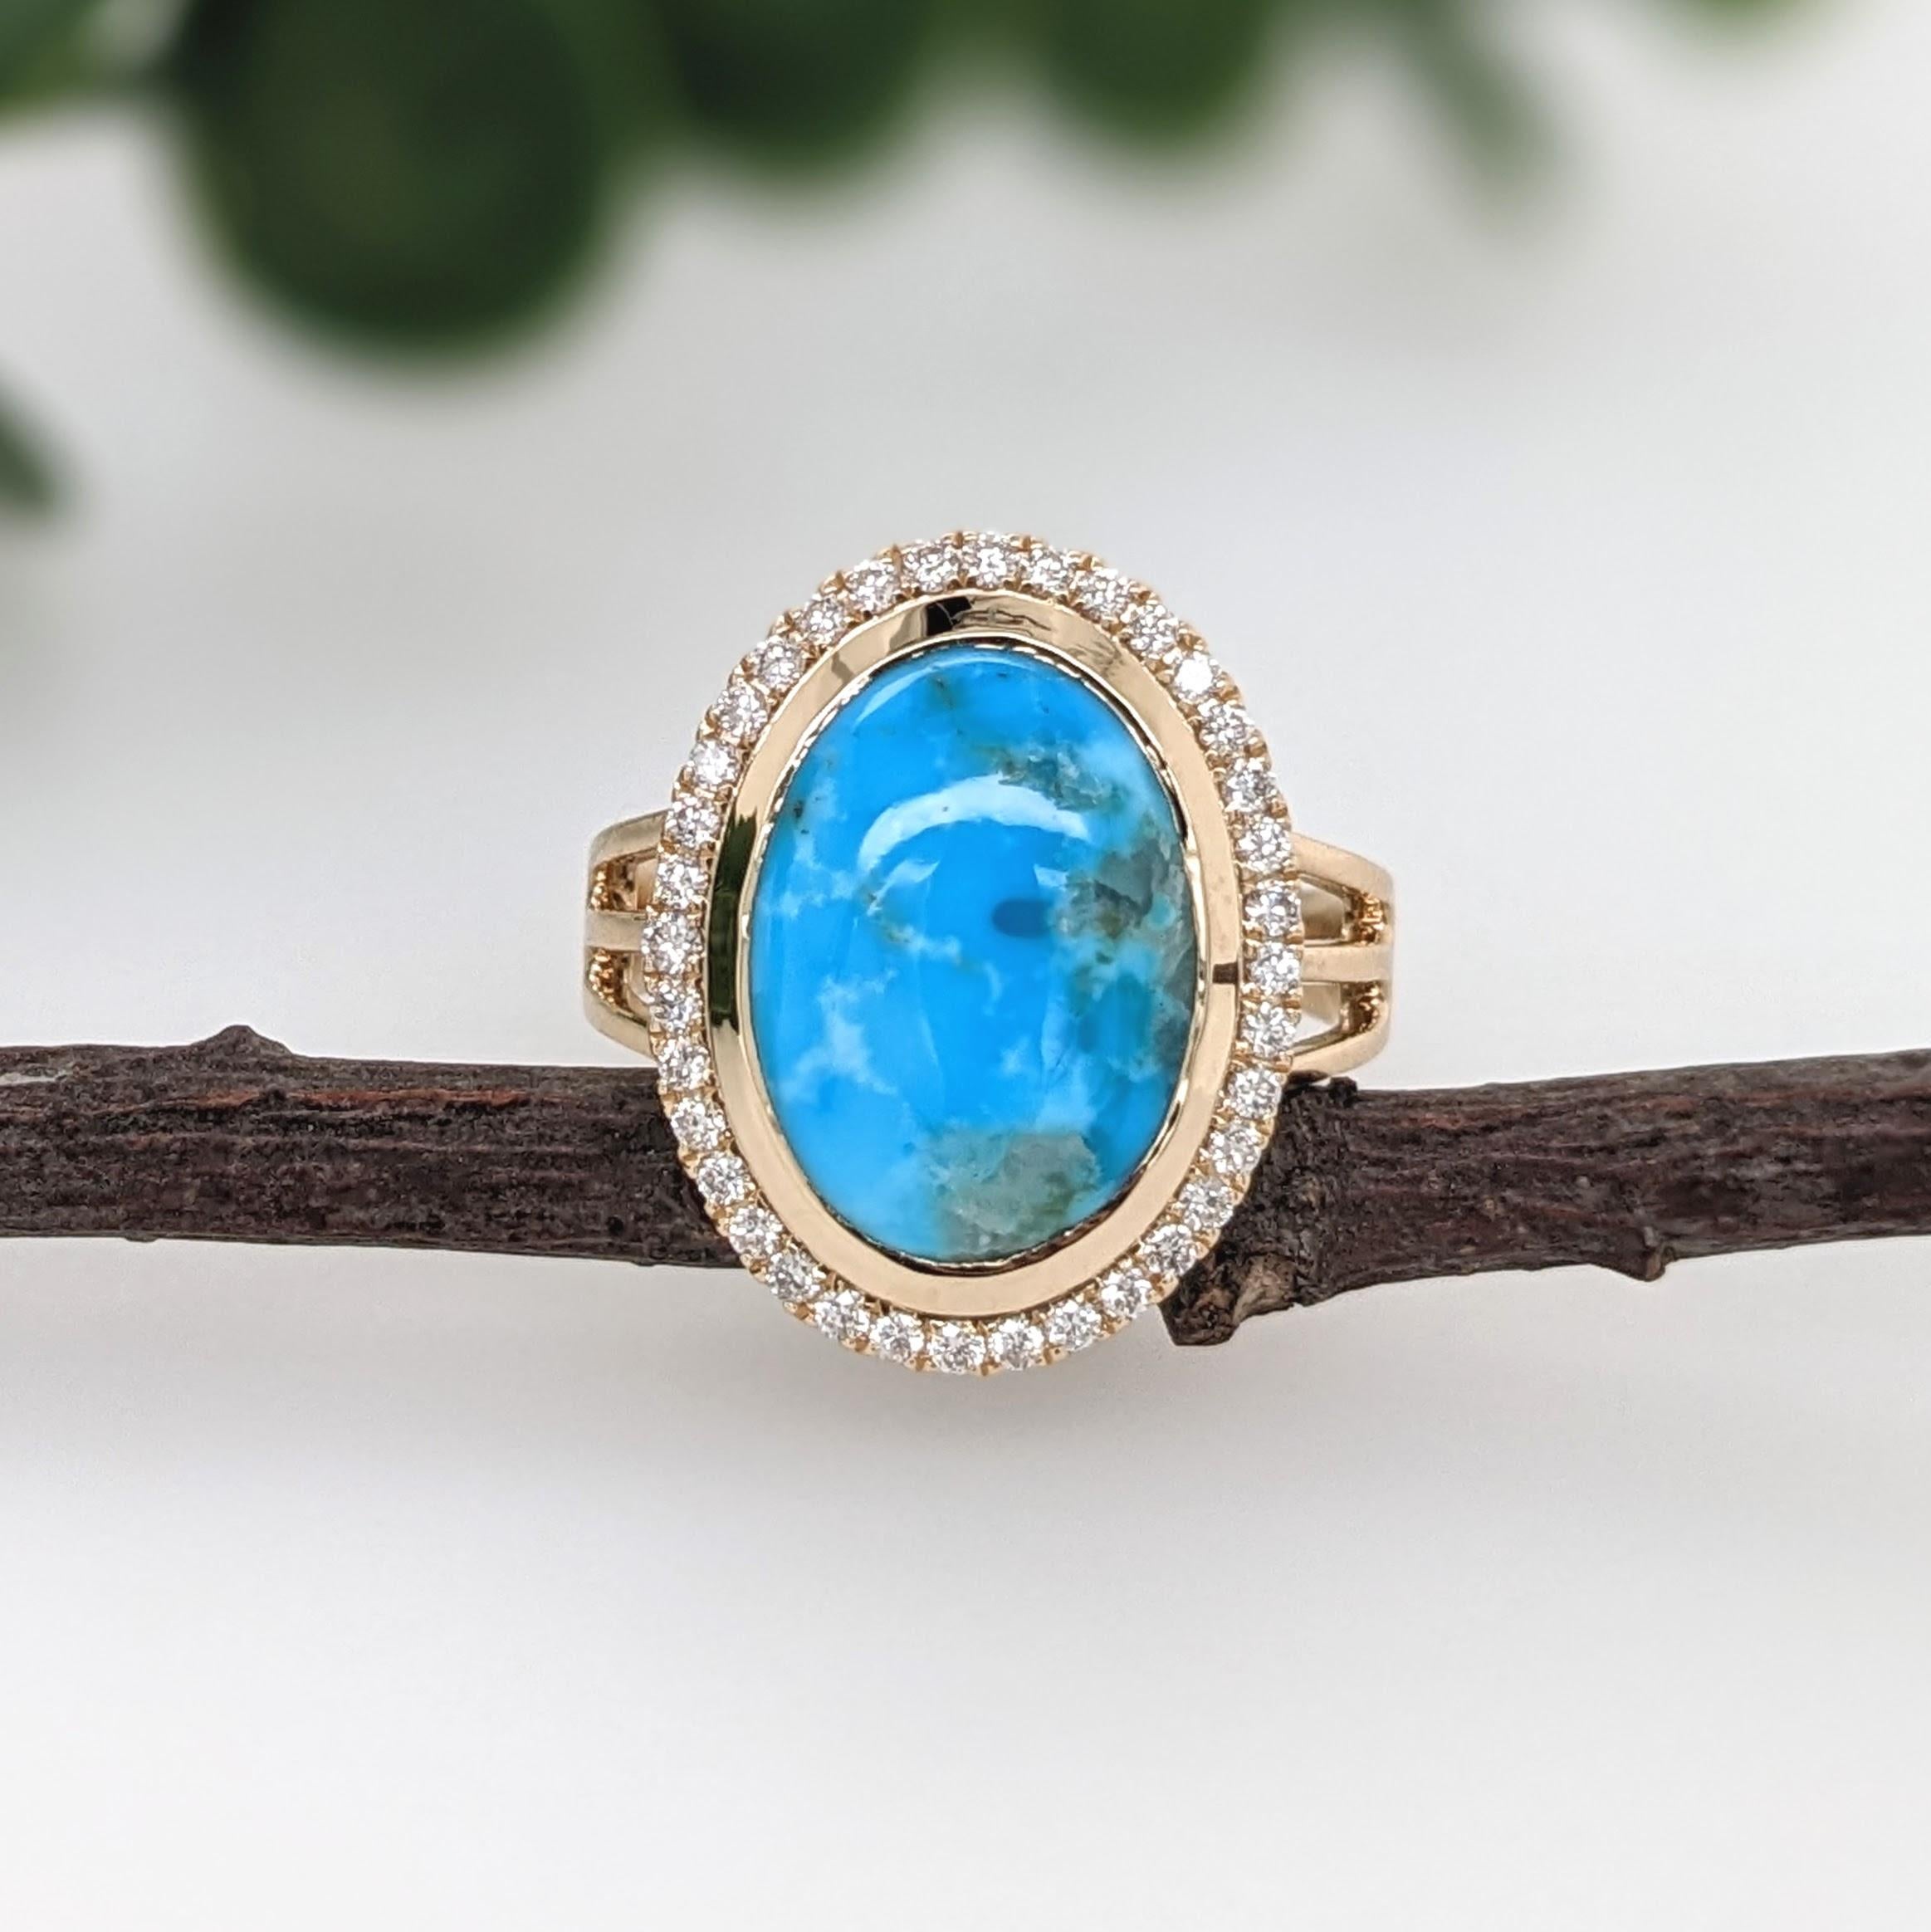 This 14k solid Gold ring features a beautiful 14x10mm Turquoise center stone with a split shank. This unique piece is perfect for daily wear.

Specifications

Item Type: Ring
Center Stone: Turquoise
Treatment: Impregnated
Weight: 4.68ct
Head size: